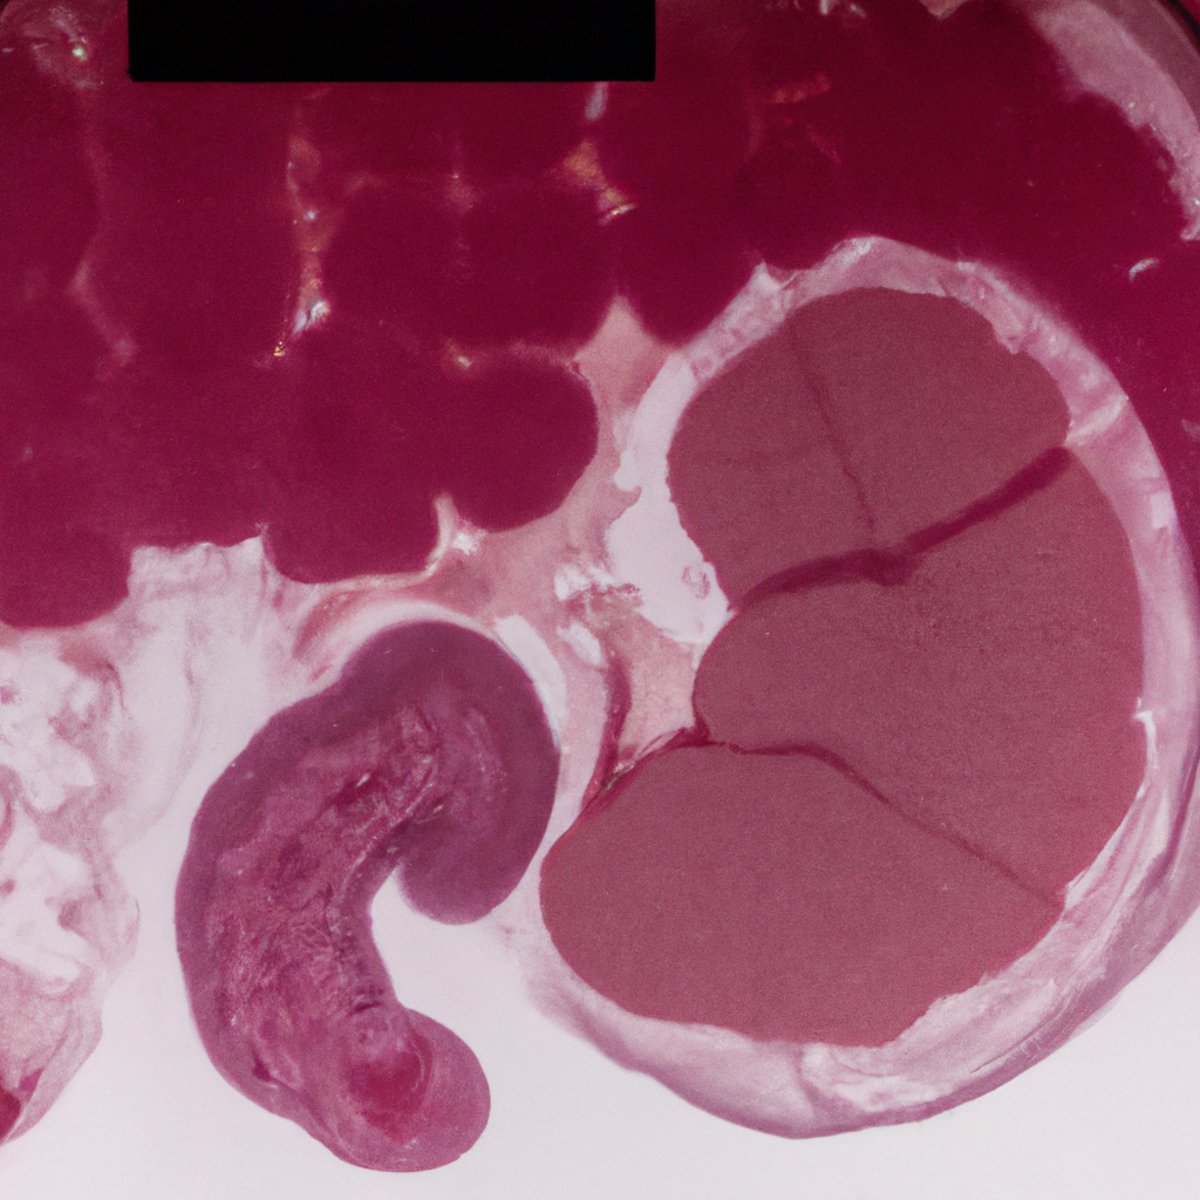 Close-up view of healthy and annular pancreas side by side, showcasing anatomical structures and textures.